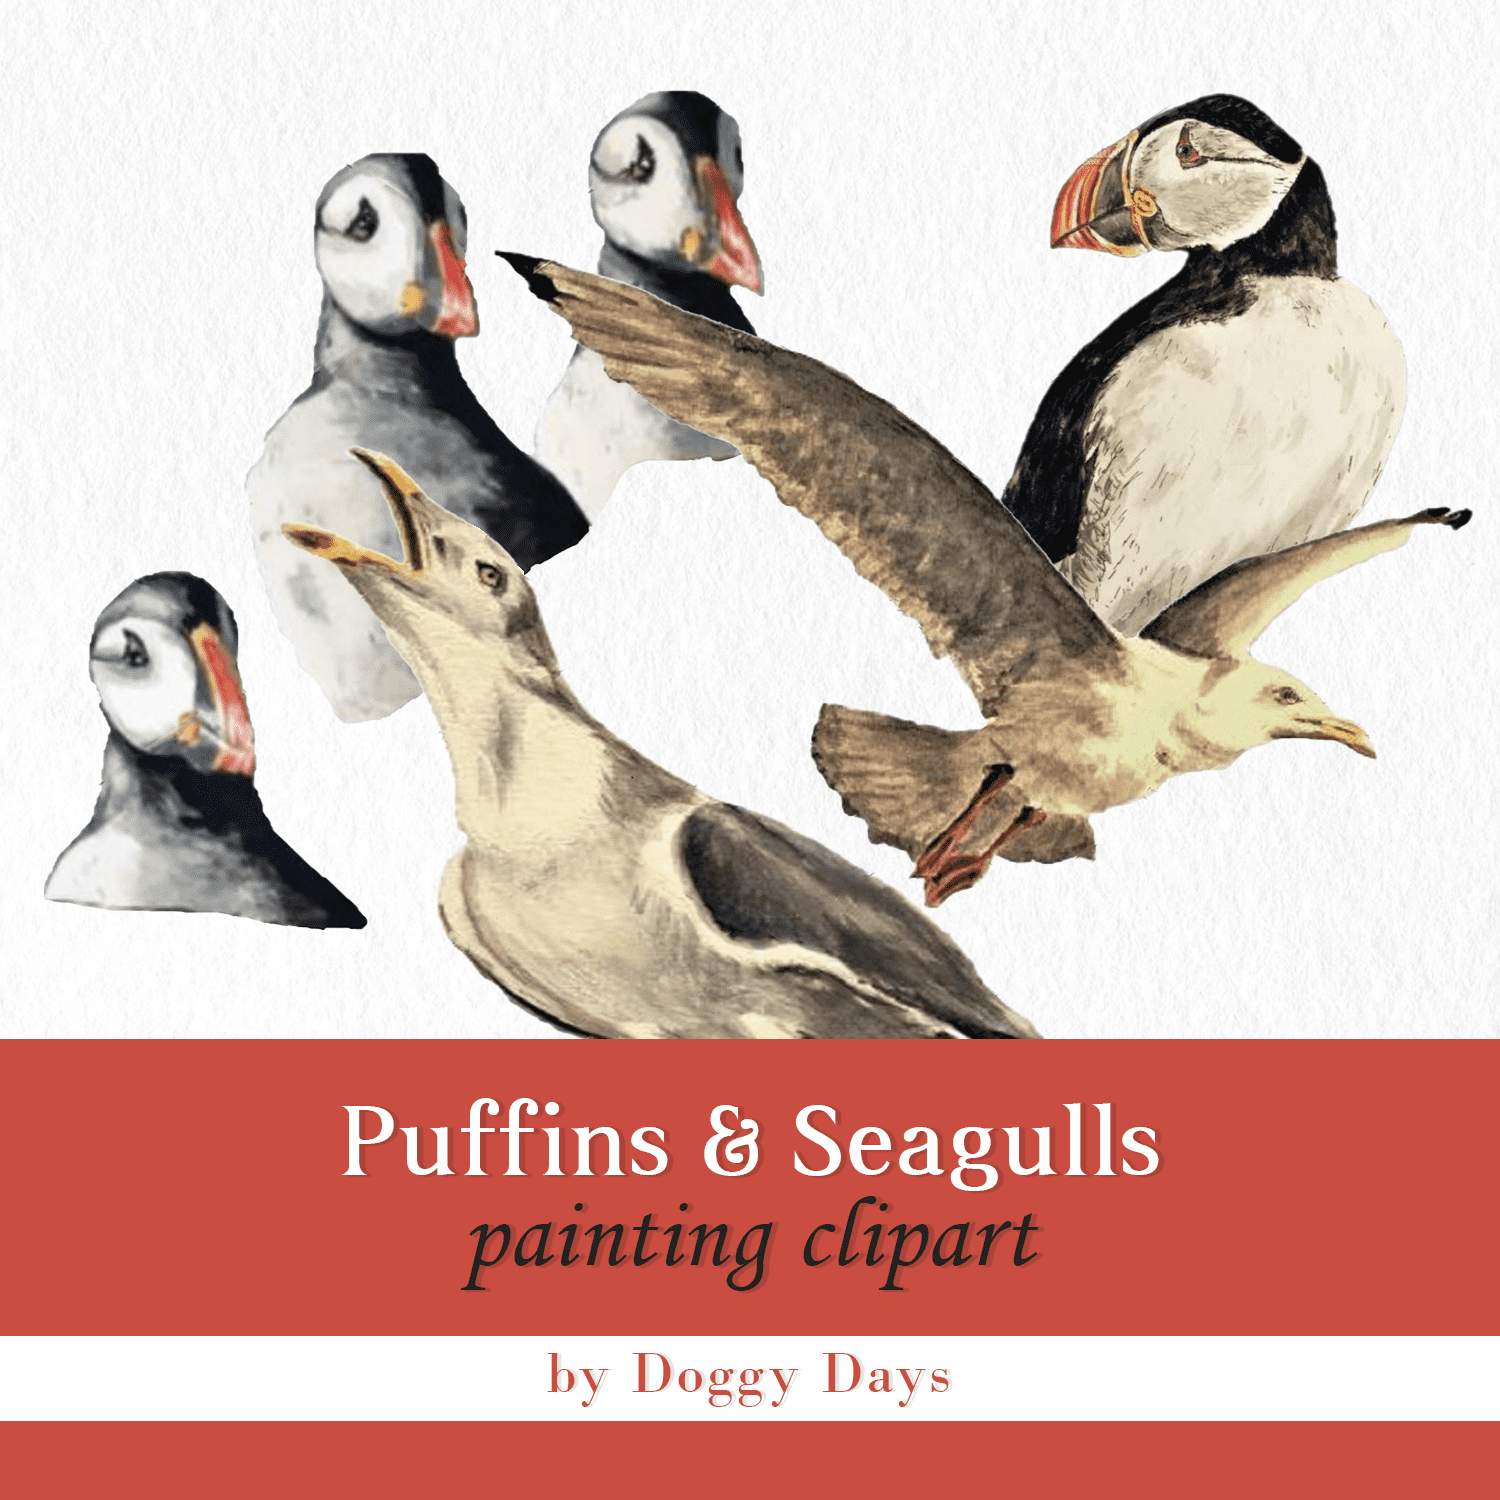 Puffins & Seagulls painting clipart cover.